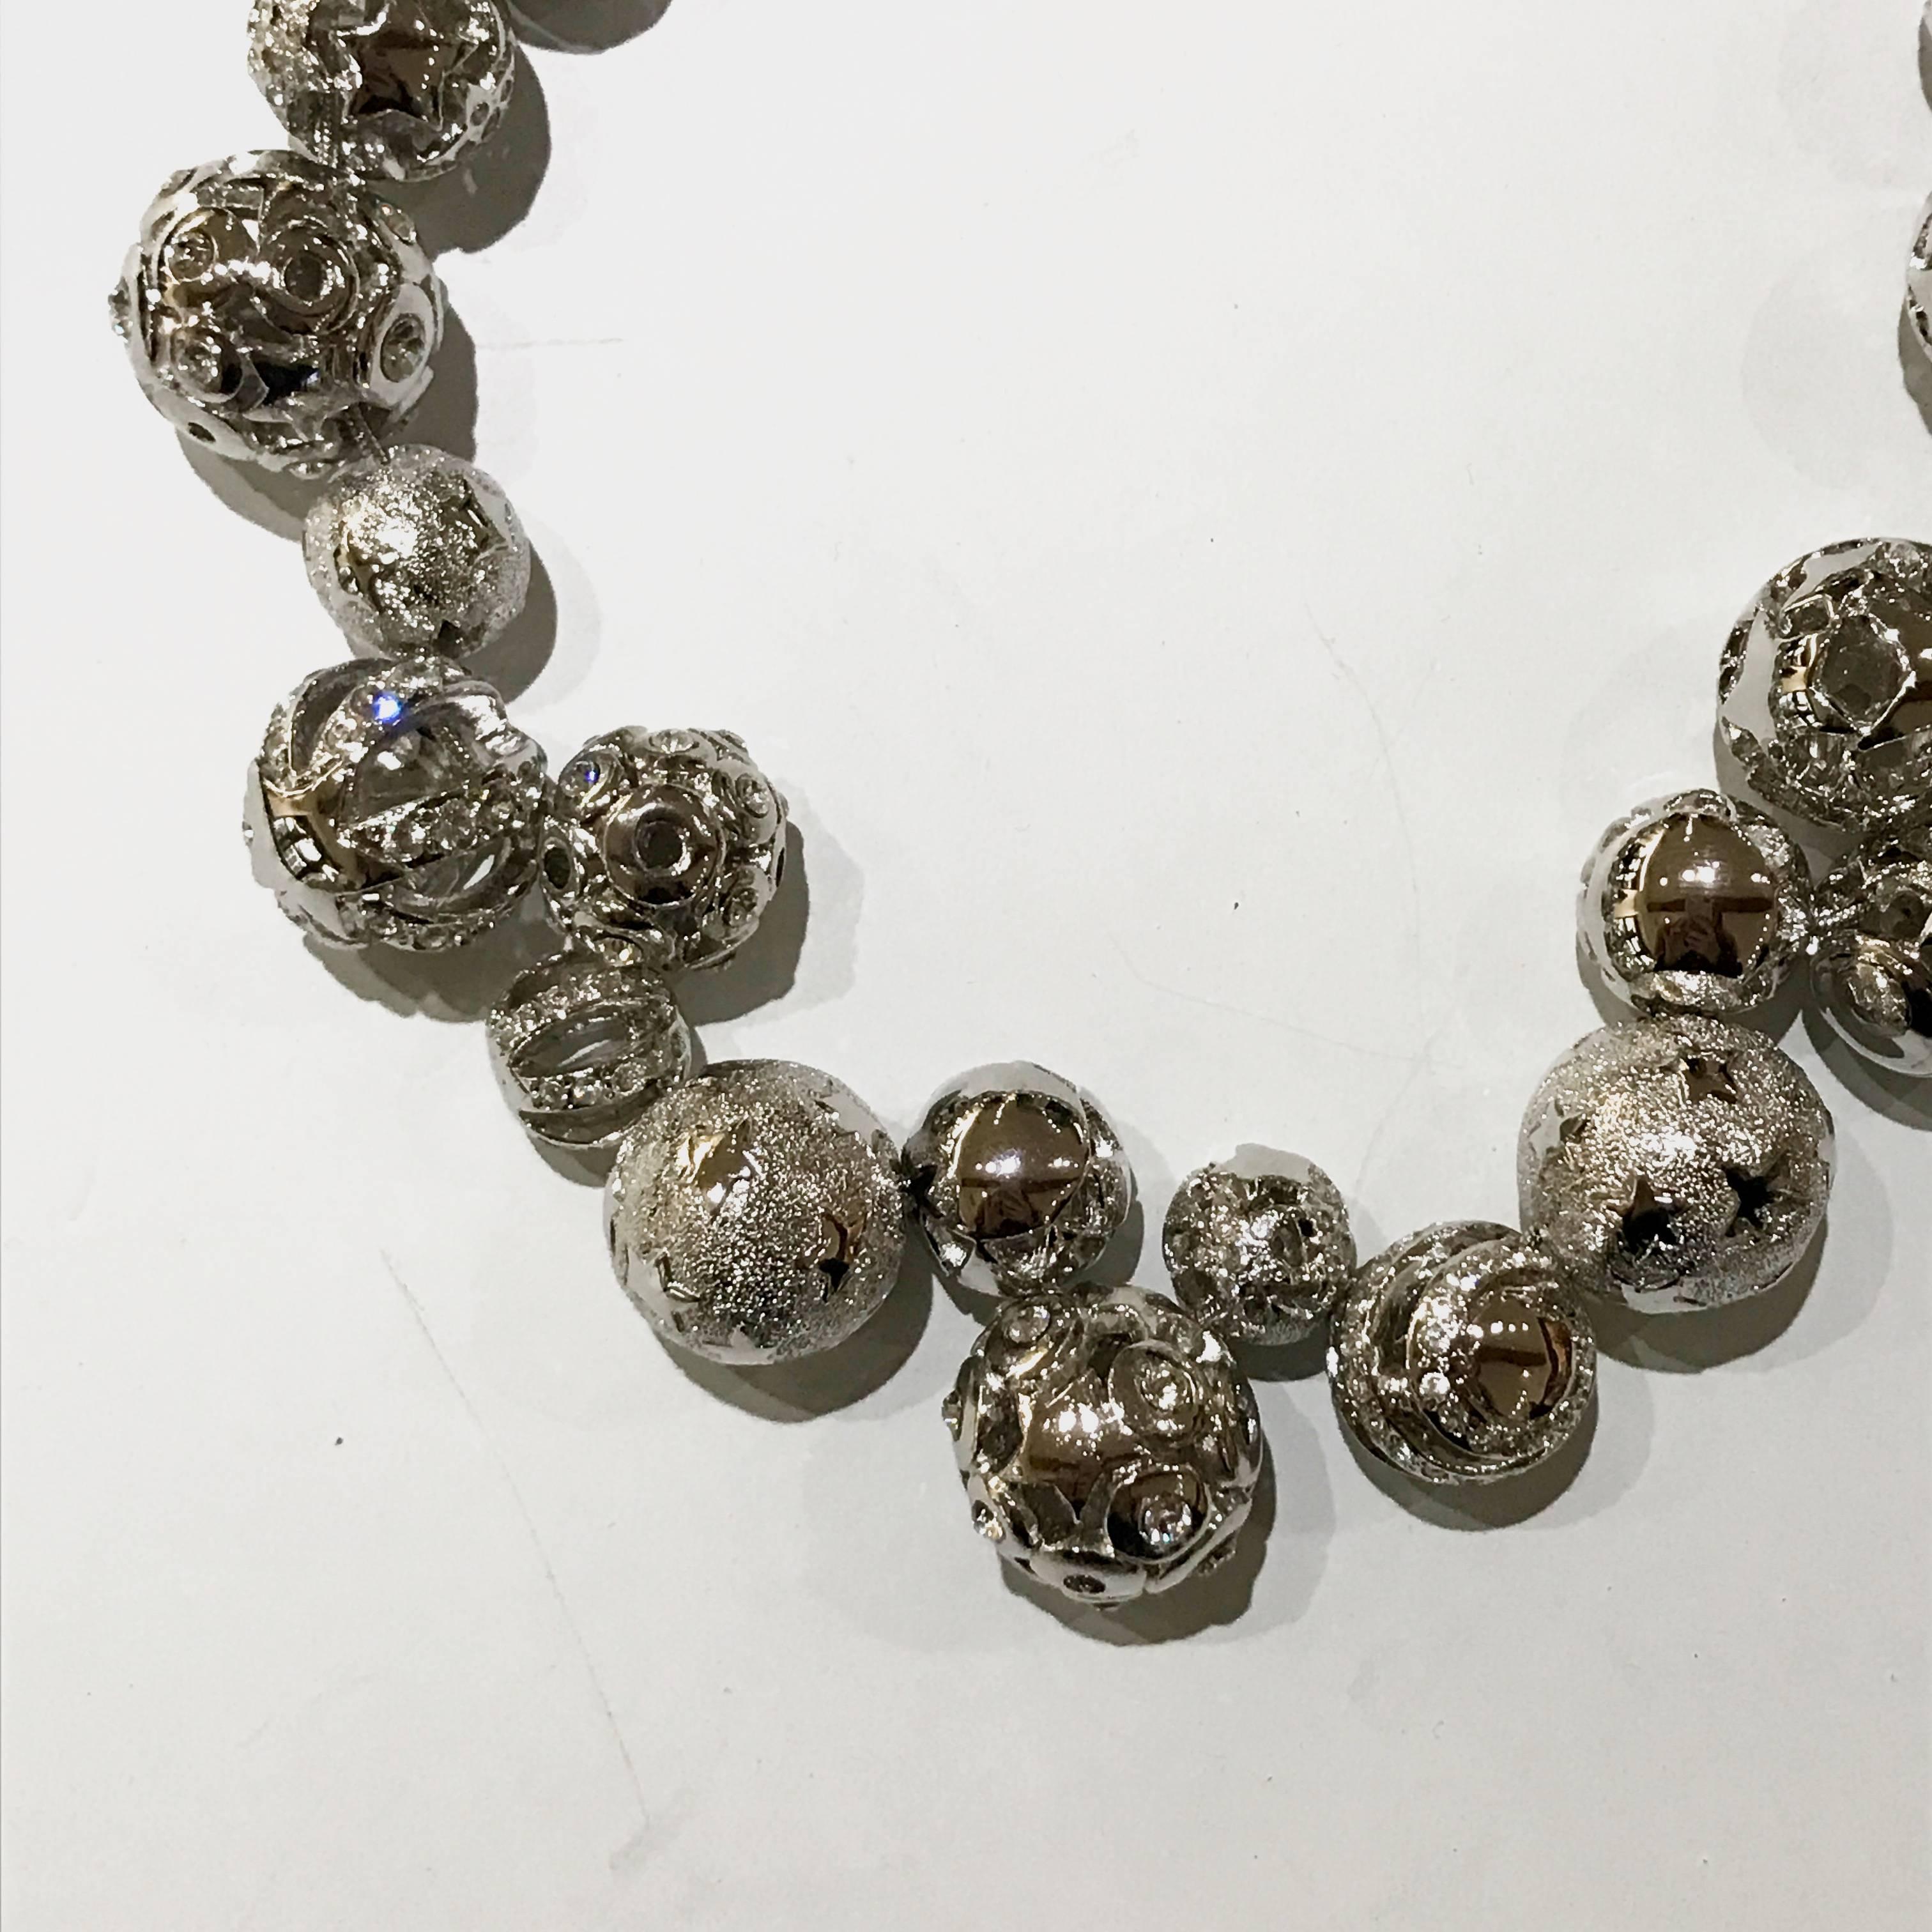 This necklace by Gianni Versace is rare with it's unique detailing of balls with different cut-out patterns. The silver tone complements beautifully against the sparkling stones. The balls are individually hand crafted and are unique to themselves